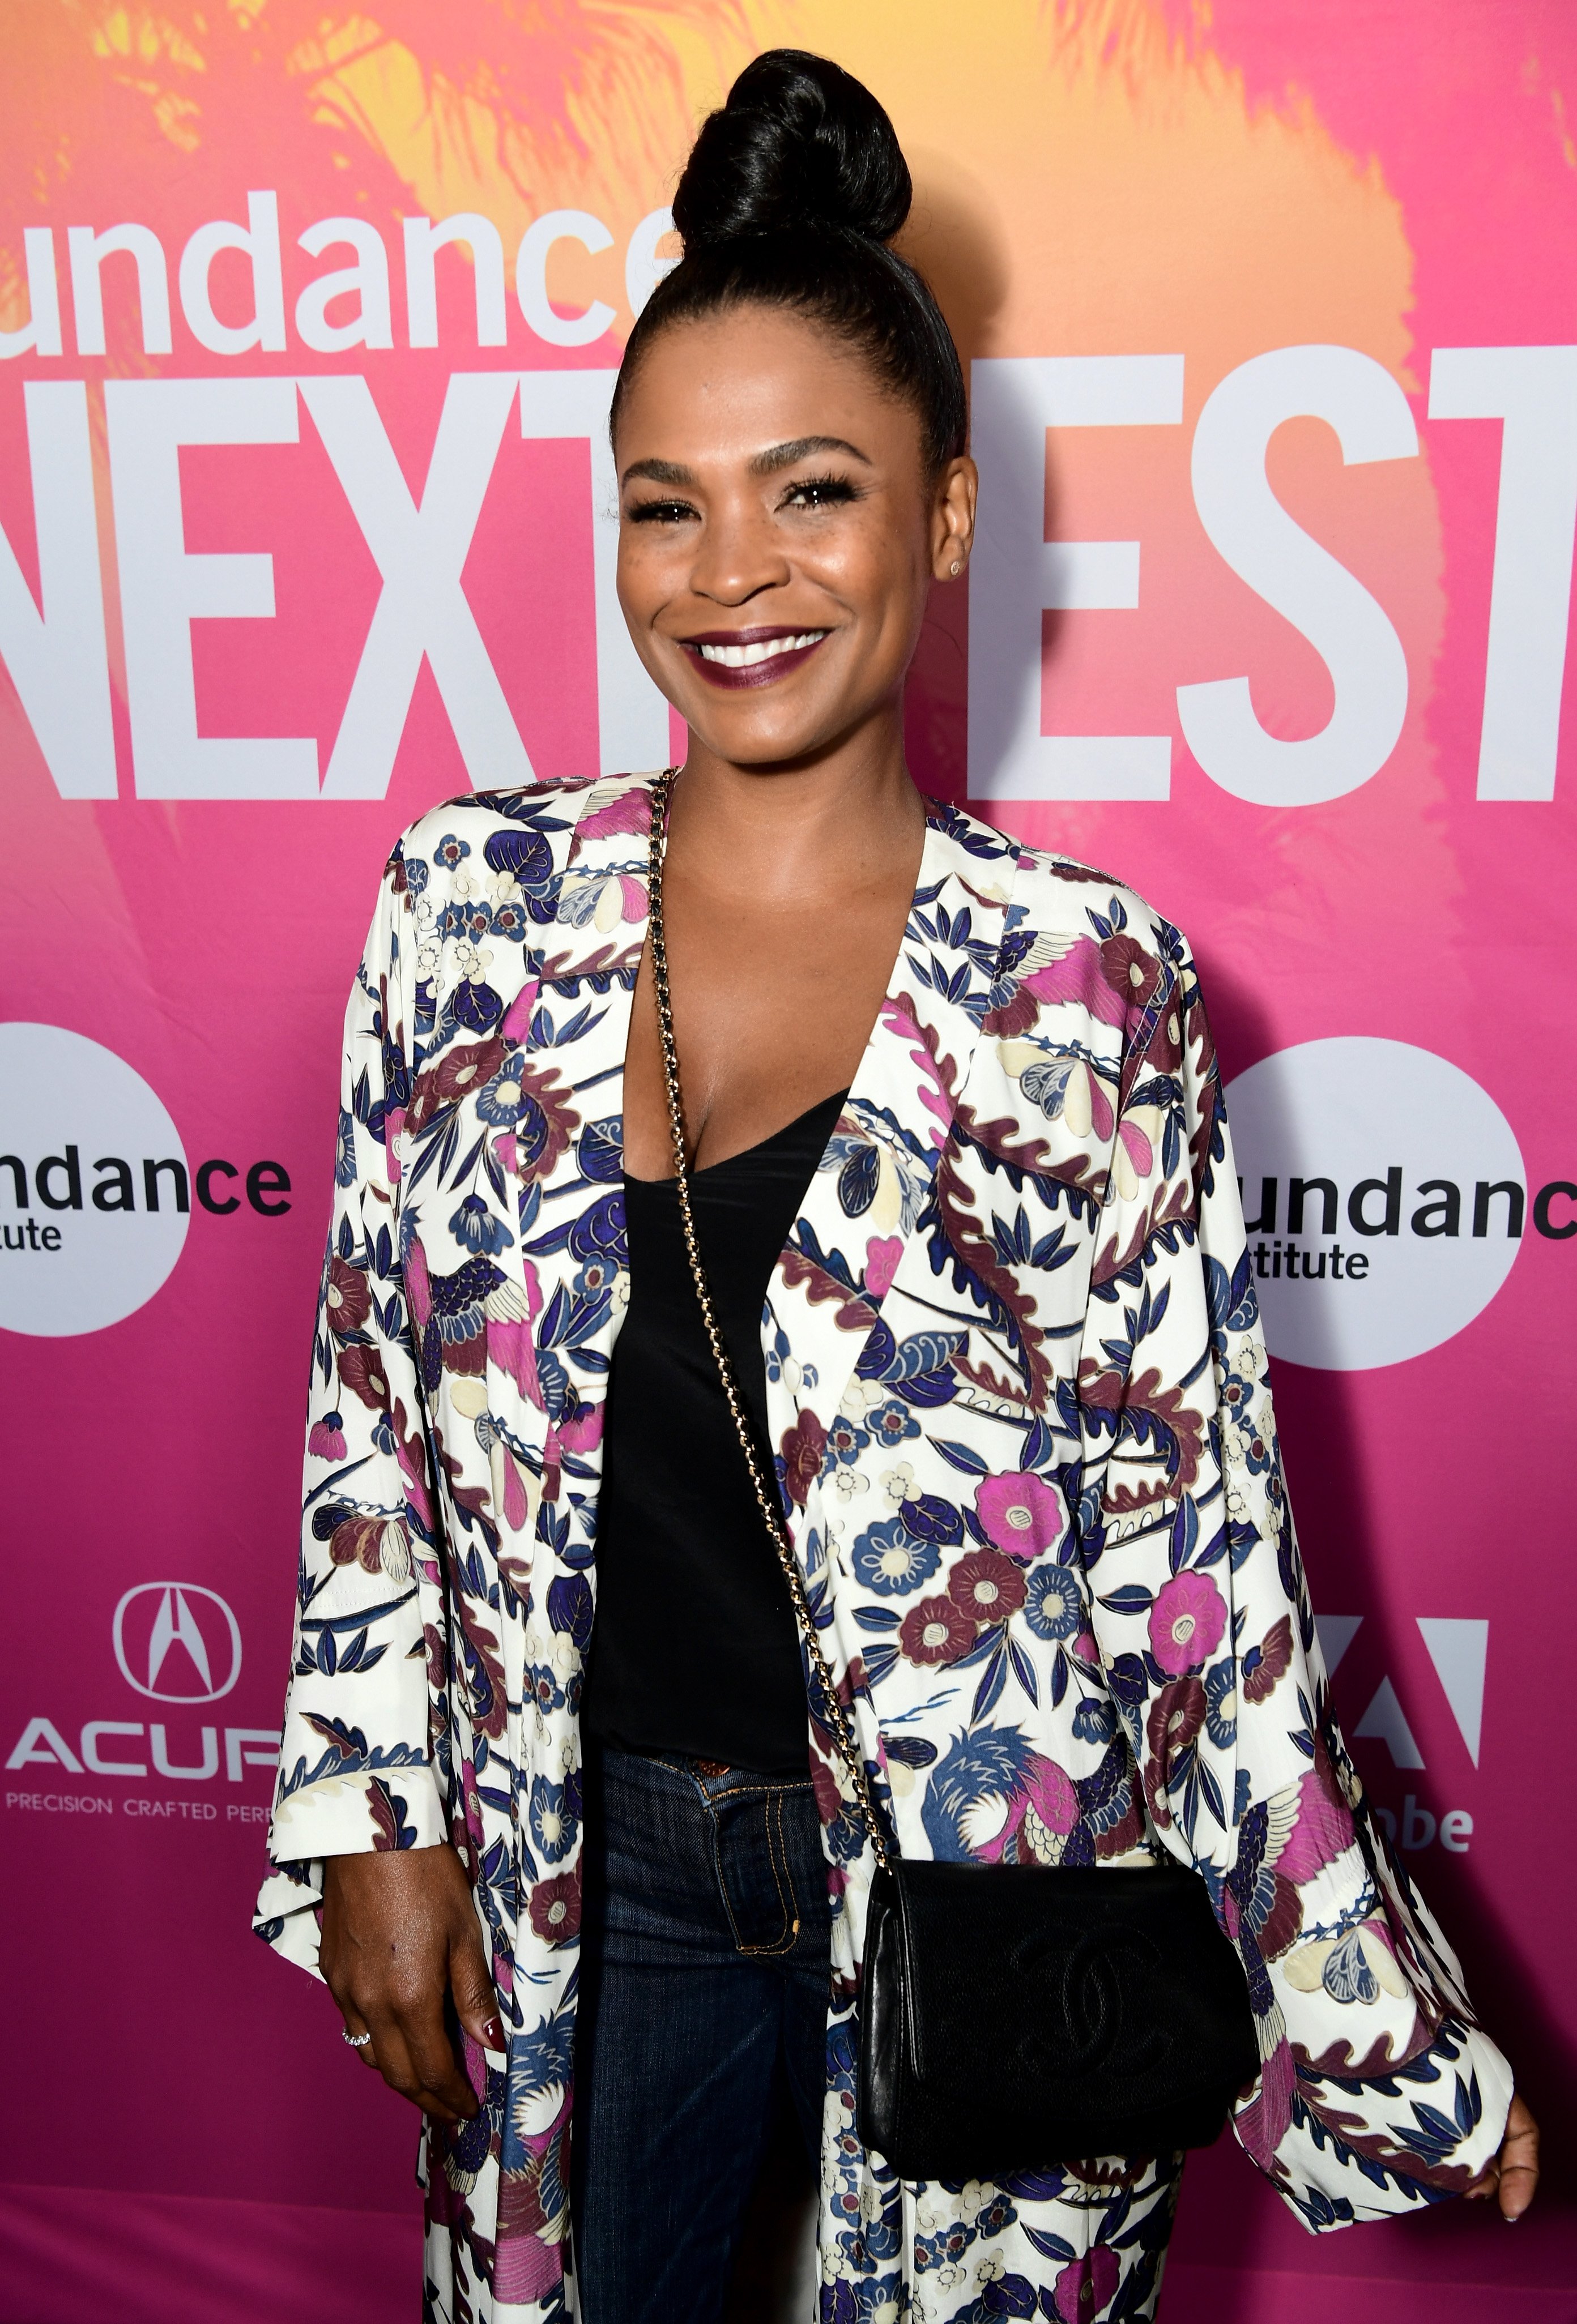 Nia Long at Sundance NEXT FEST on August 11, 2017 in California | Photo: Getty Images